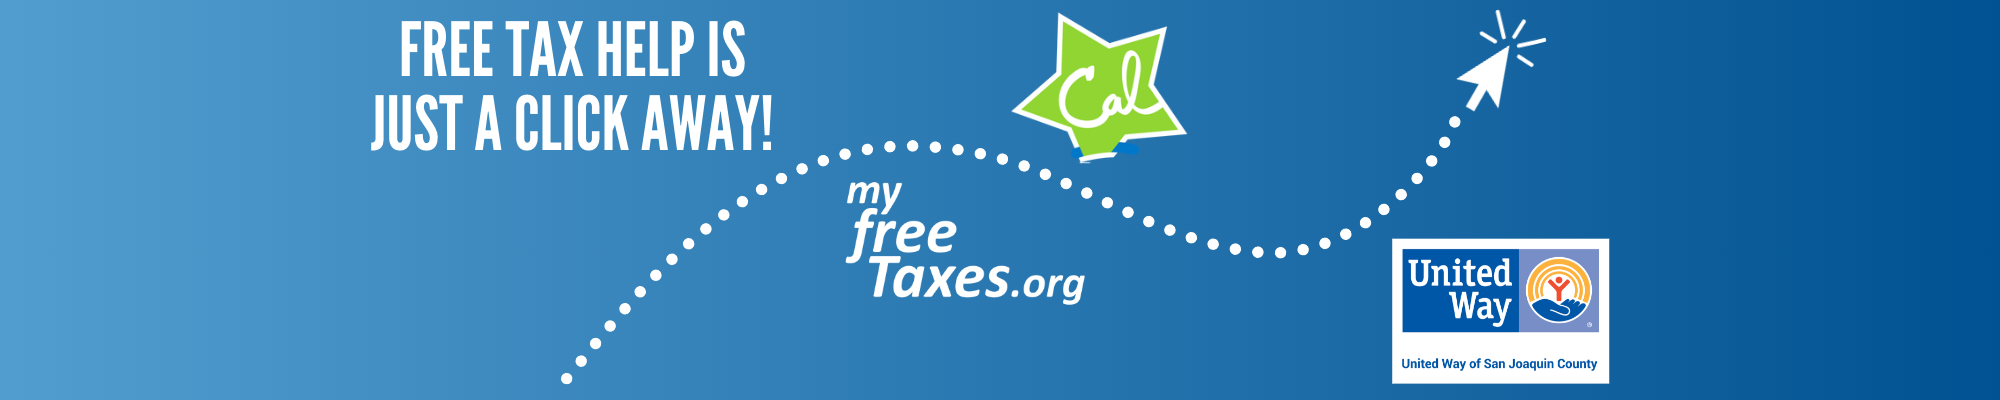 Free tax help is just a click away!